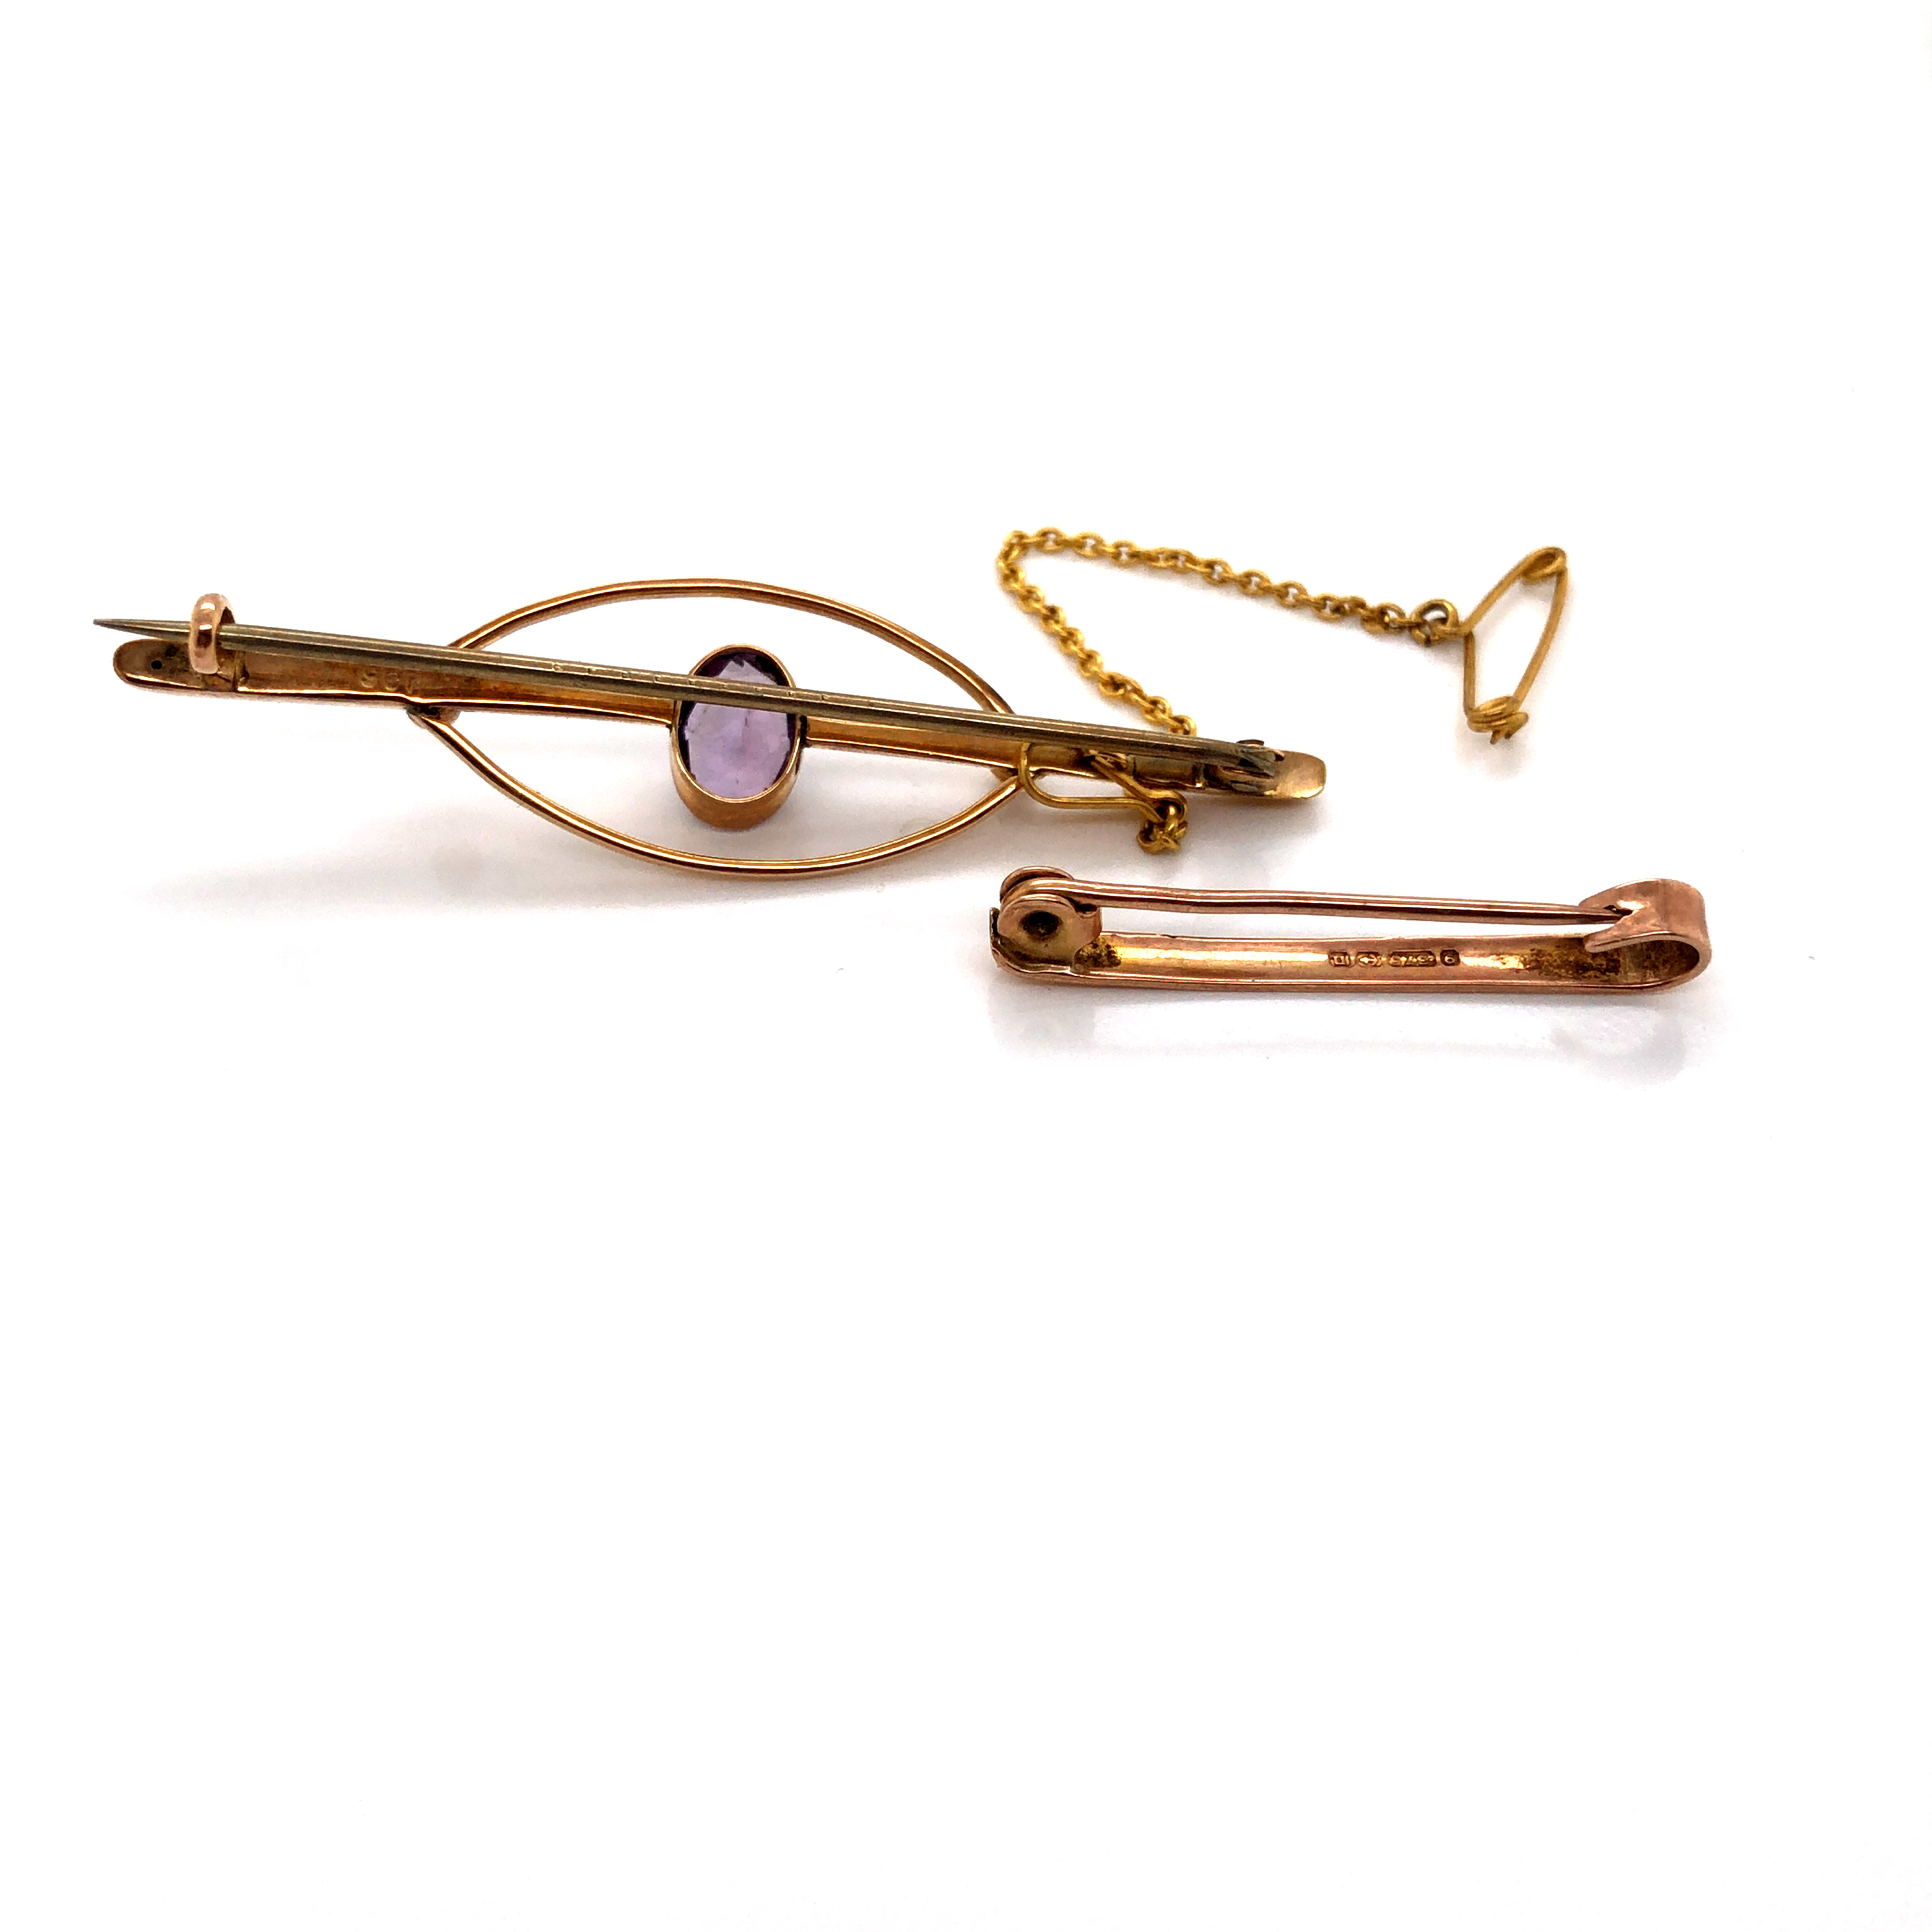 A 9ct GOLD ANTIQUE BAR BROOCH, TOGETHER WITH A FURTHER ANTIQUE BAR BROOCH, HALLMARKED 1912 - Image 2 of 2